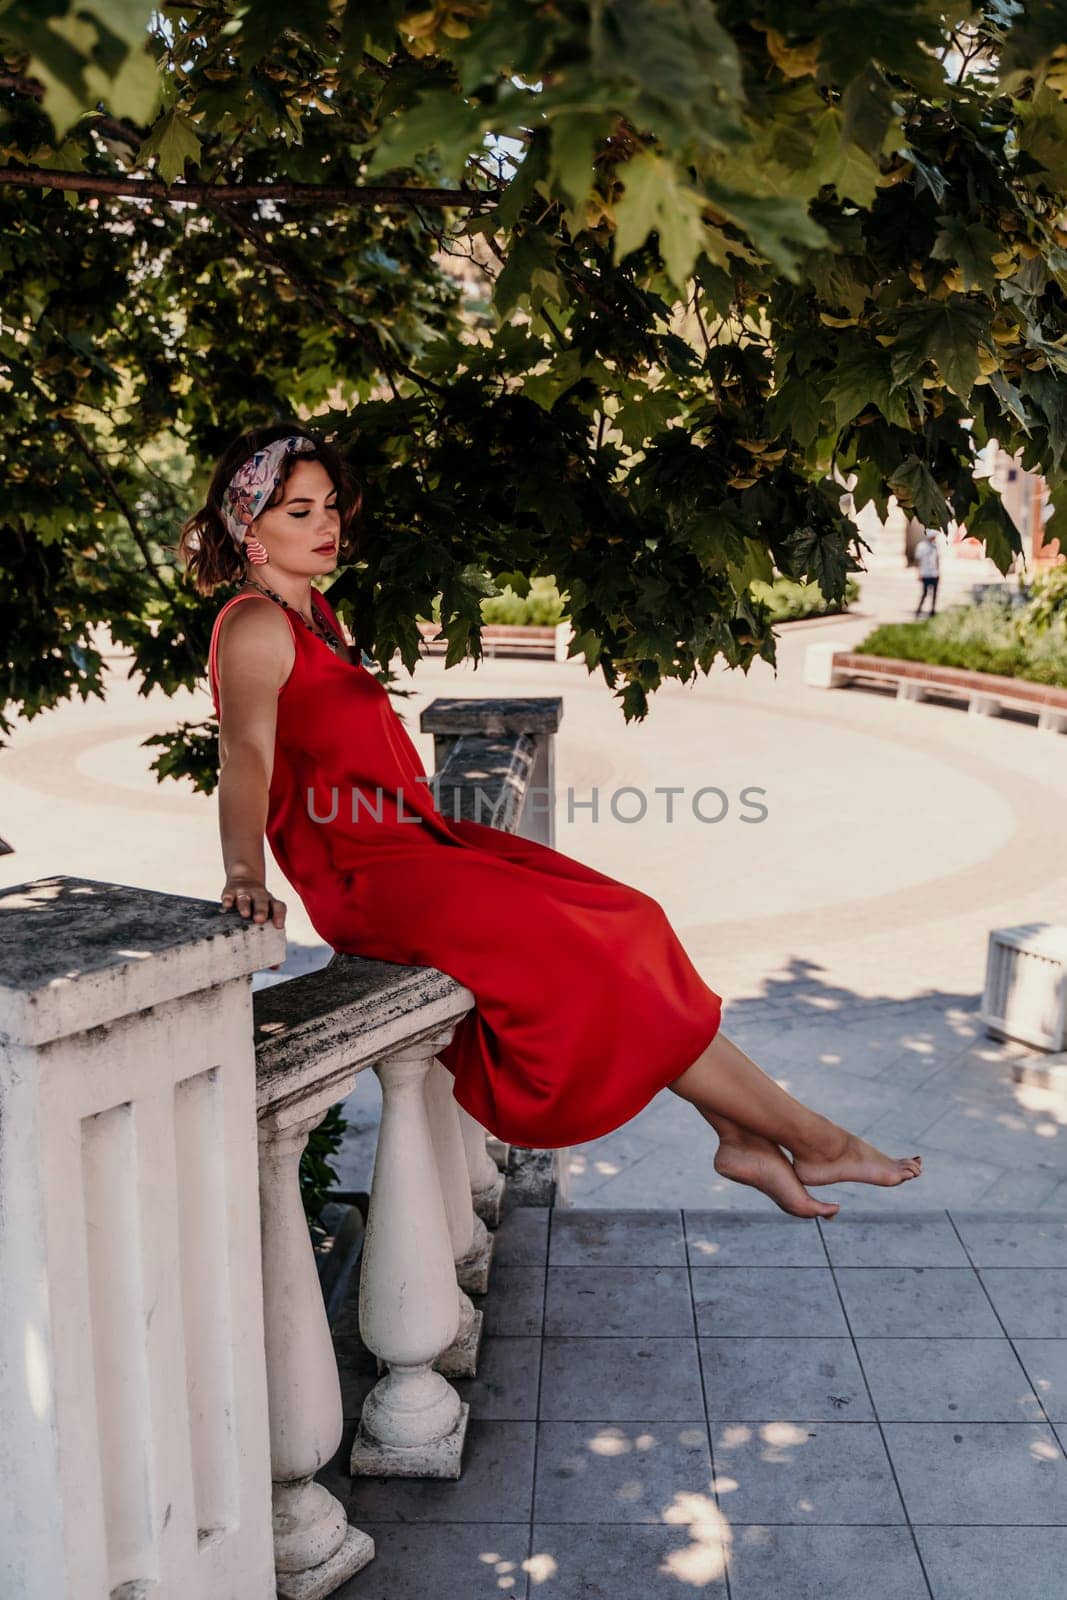 A pretty woman in a red silk dress and a bandage on her head smiles against the background of the leaves of a tree. She is leaning on the coop and looking into the camera. Vertical photo